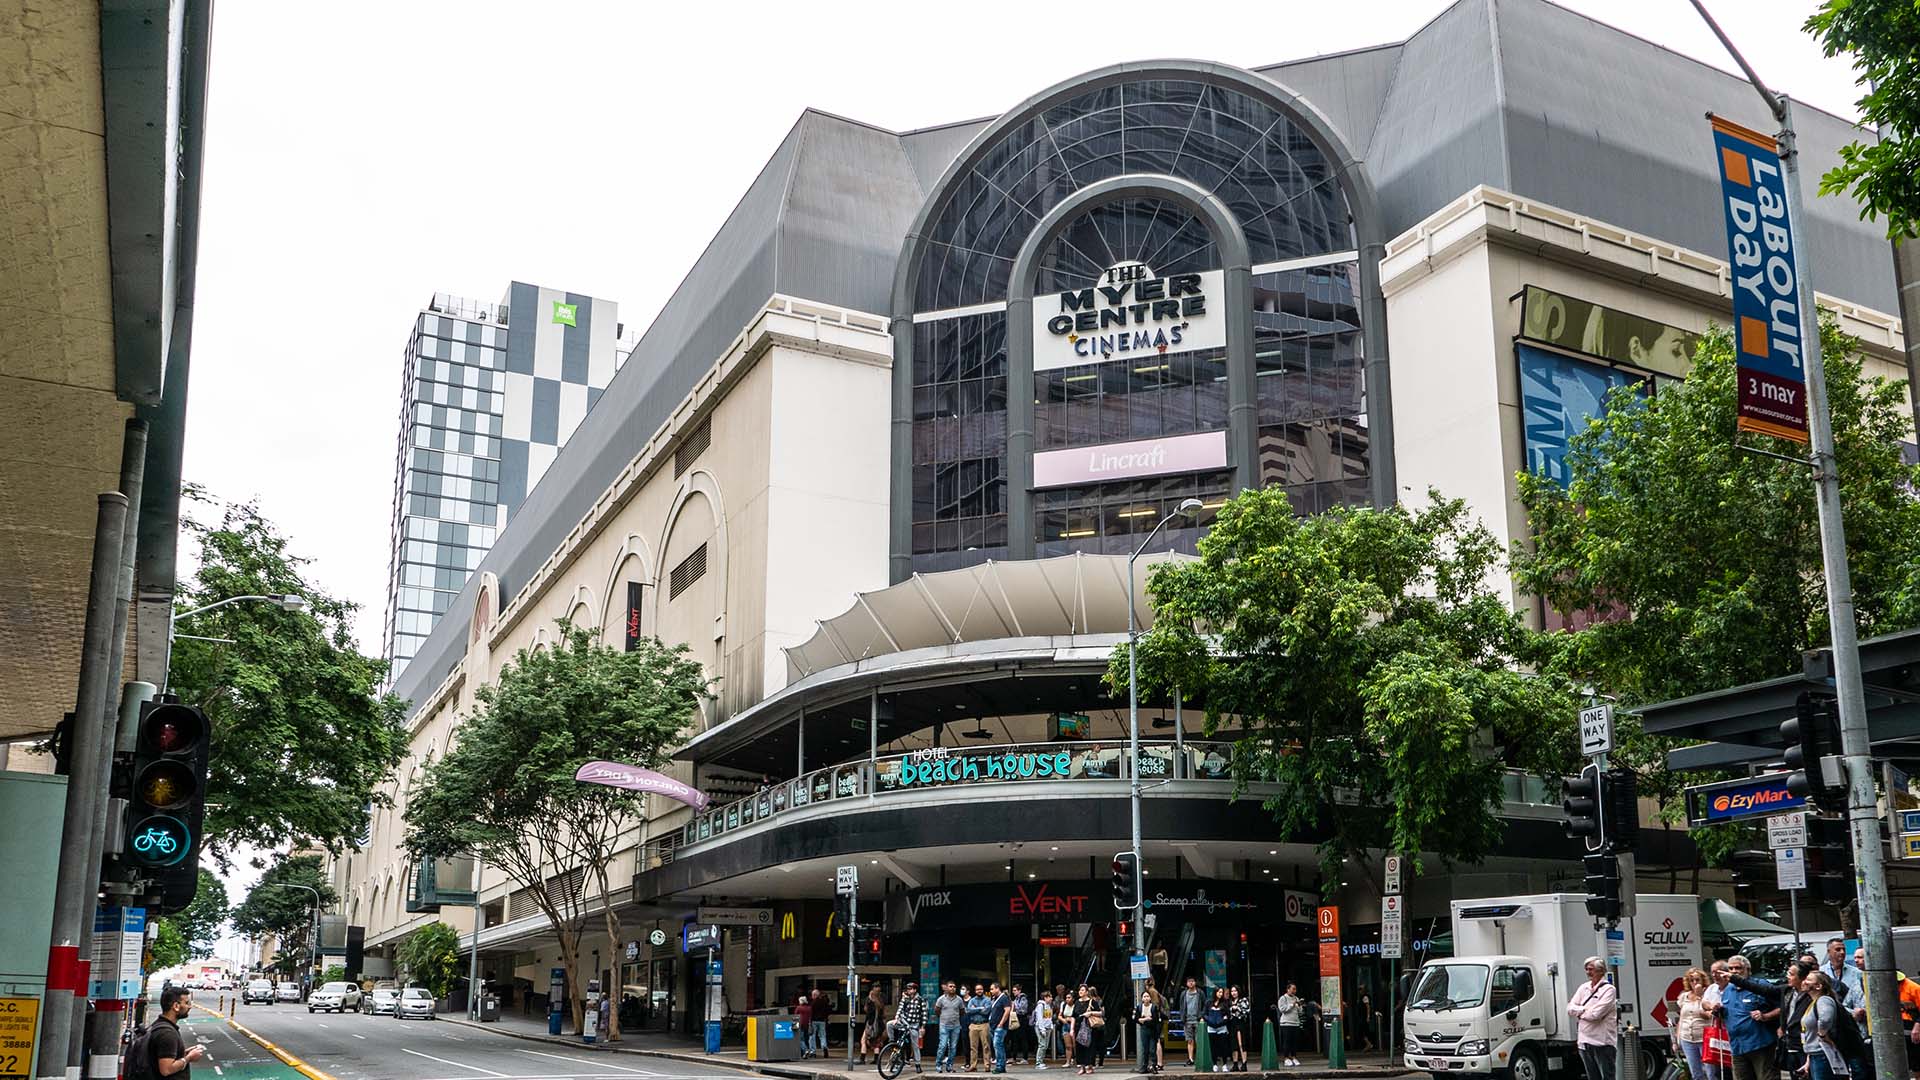 Just In: Like the Dragon Coaster Before It, Myer Is Leaving the Queen Street Mall's Myer Centre